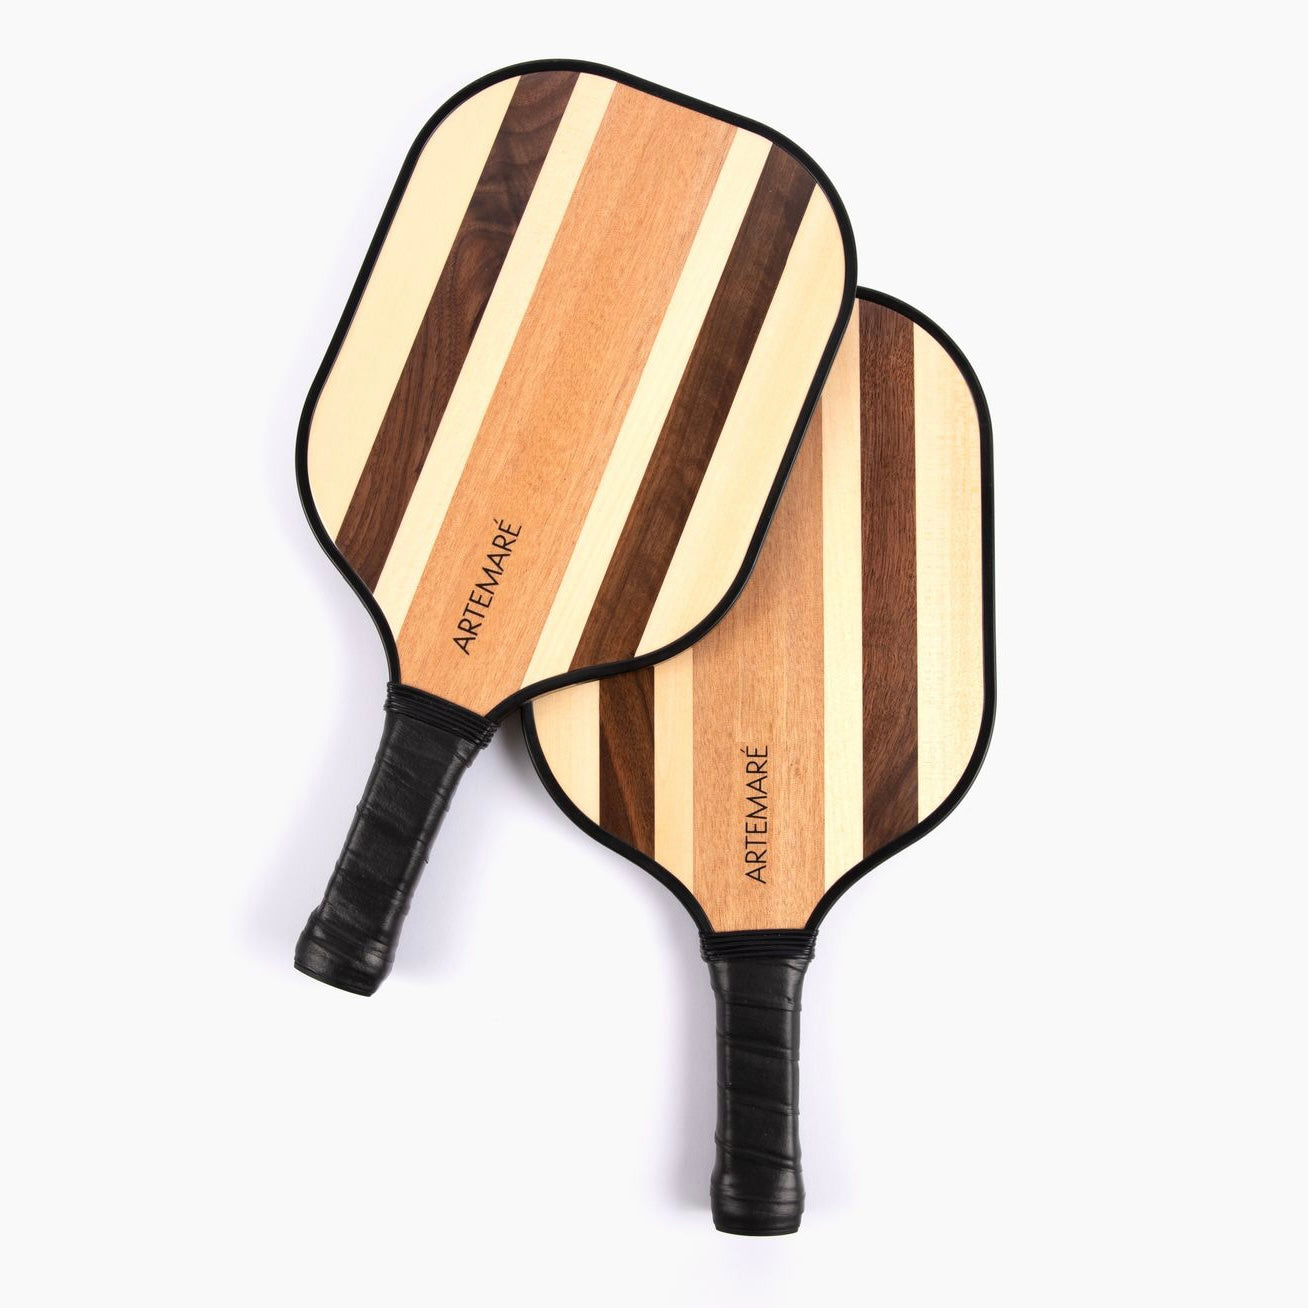 Two Luxury Pickleball Paddles